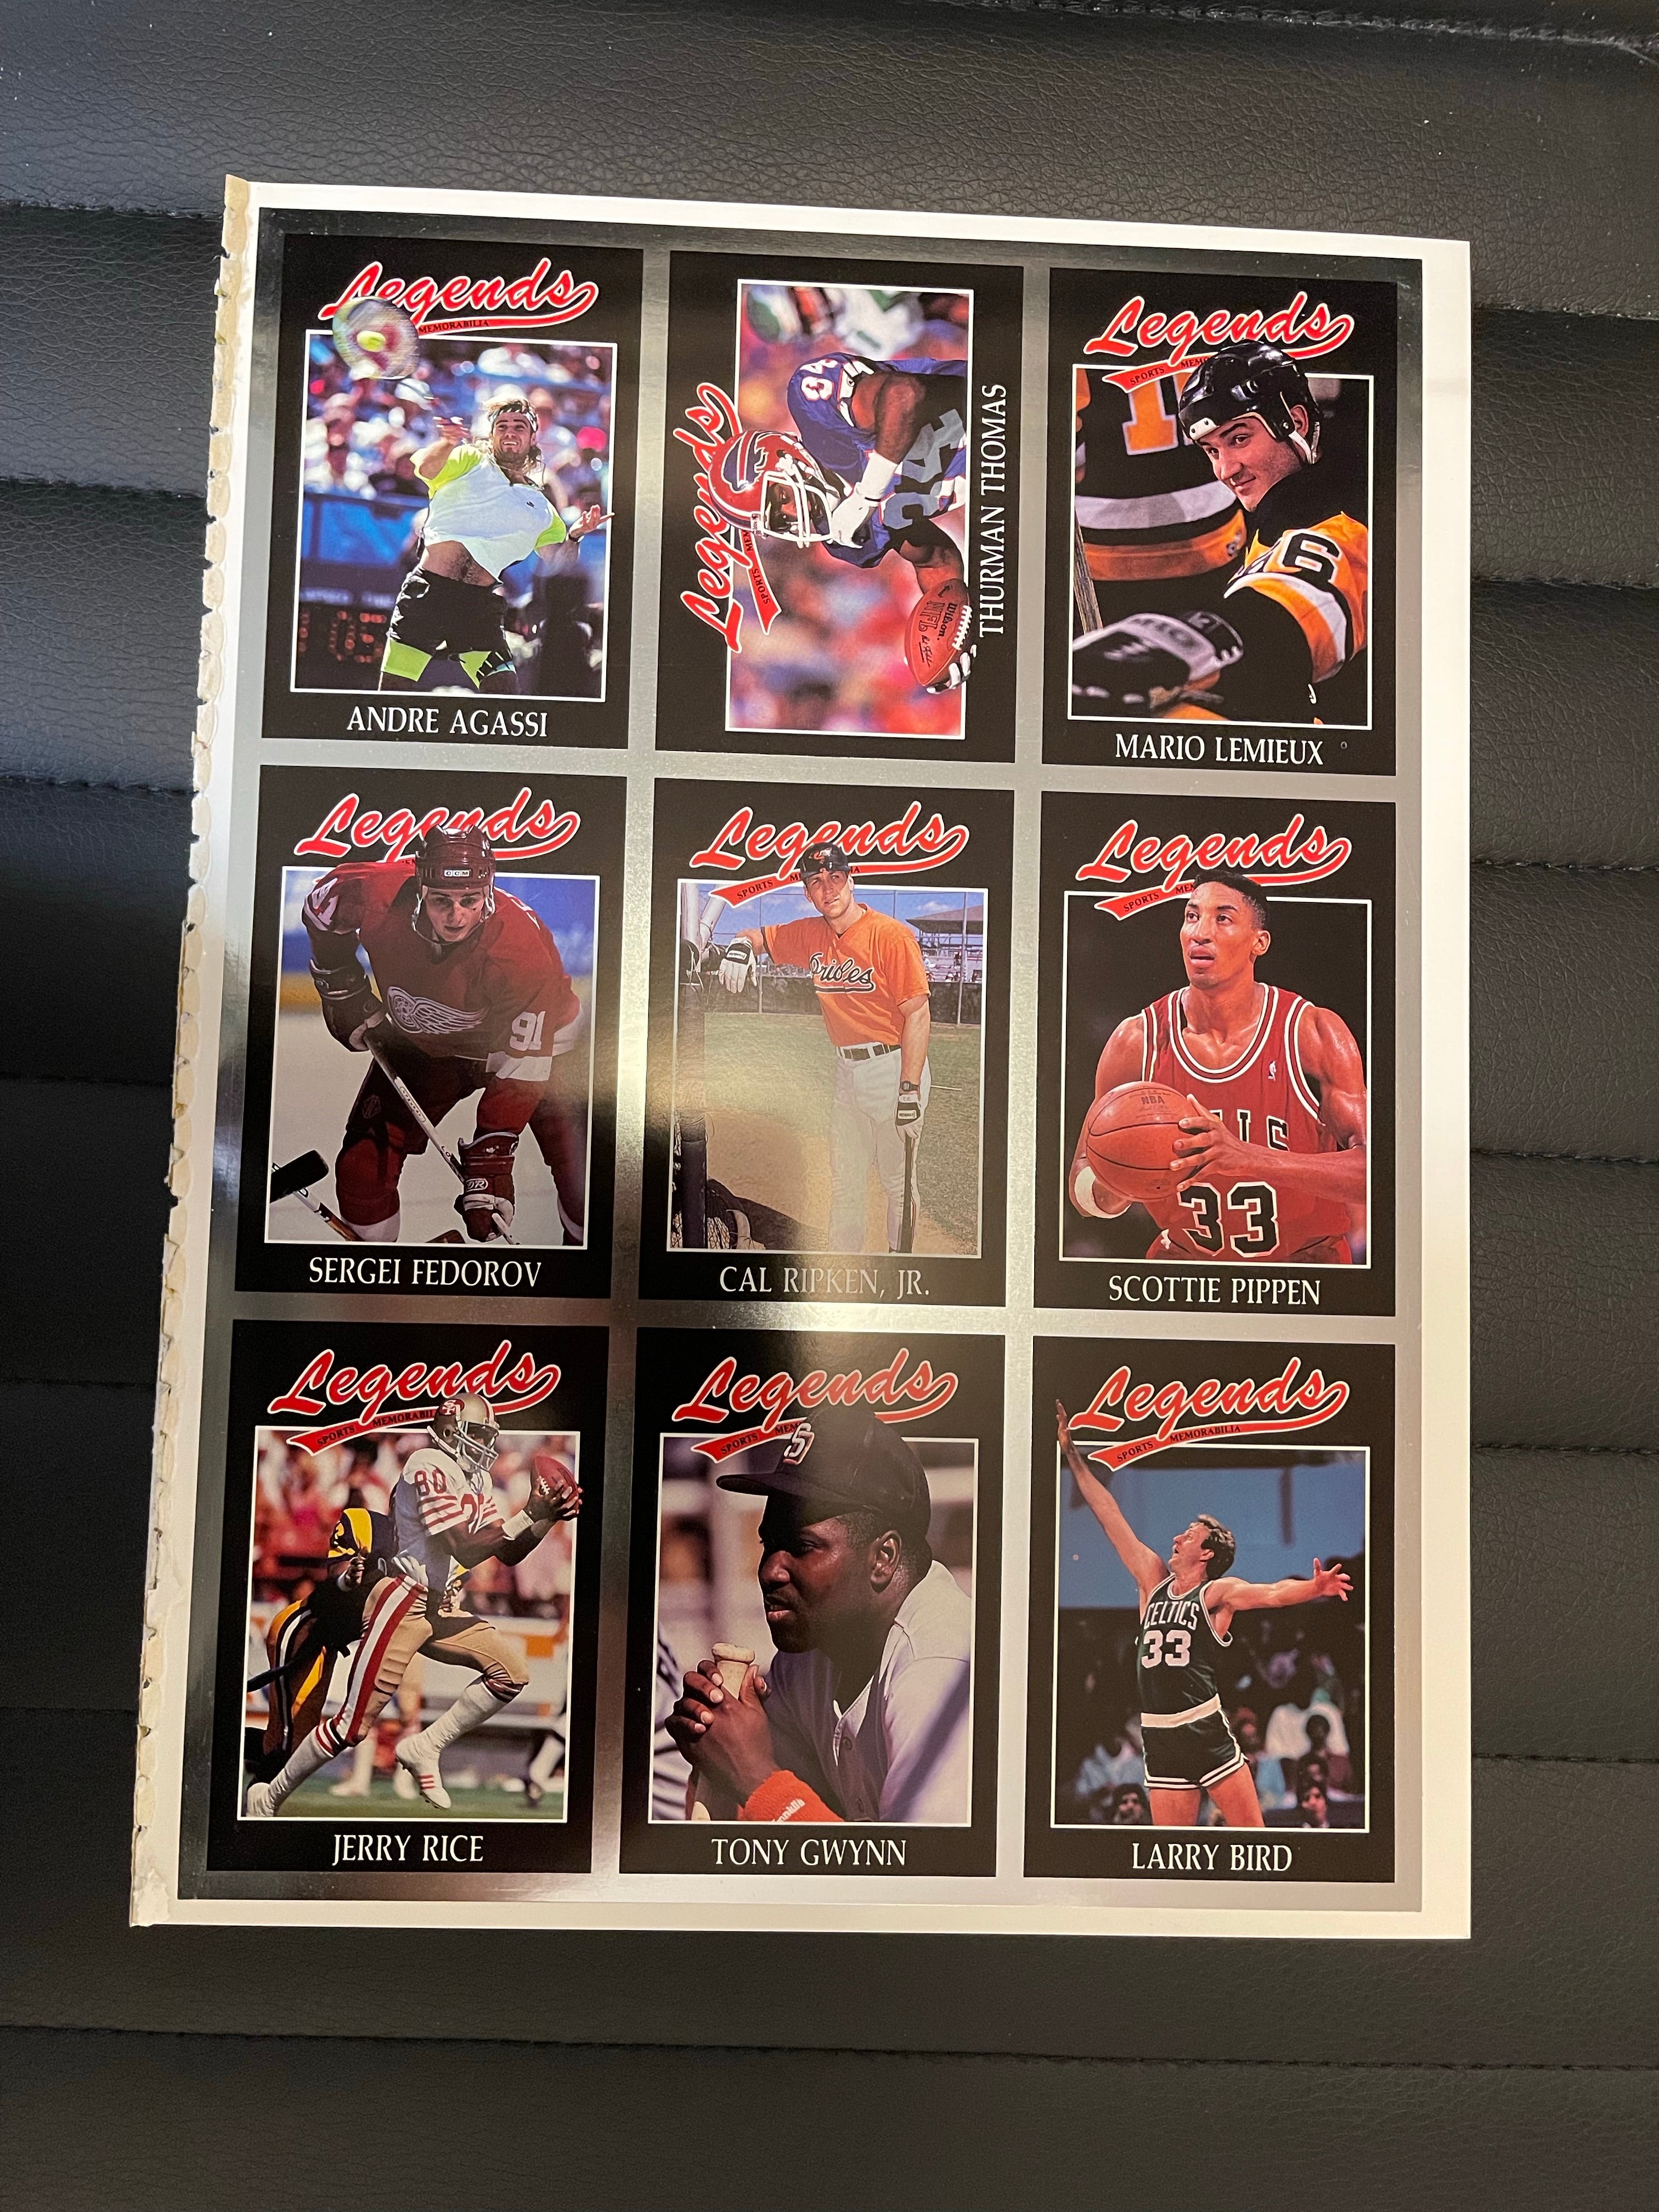 Legends sports cards uncut sheet ,Larry Bird, Lemieux and Andre Agassi and more